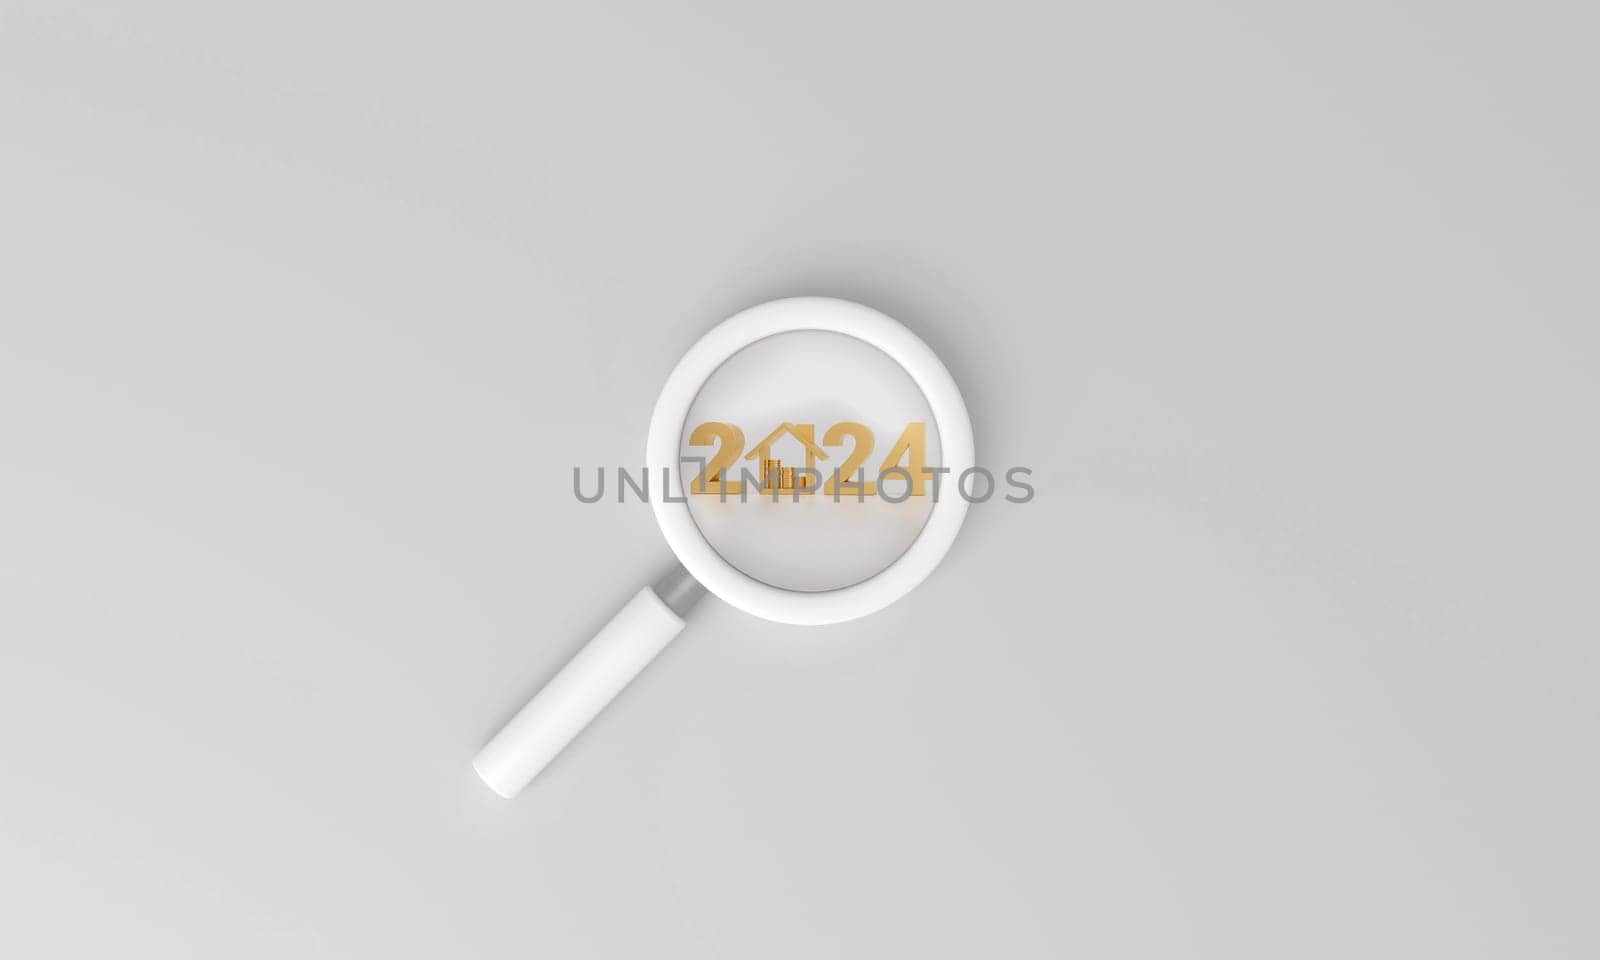 Magnifying glass is looking at golden number 2024 and house icon with Stack. 3D rendering.